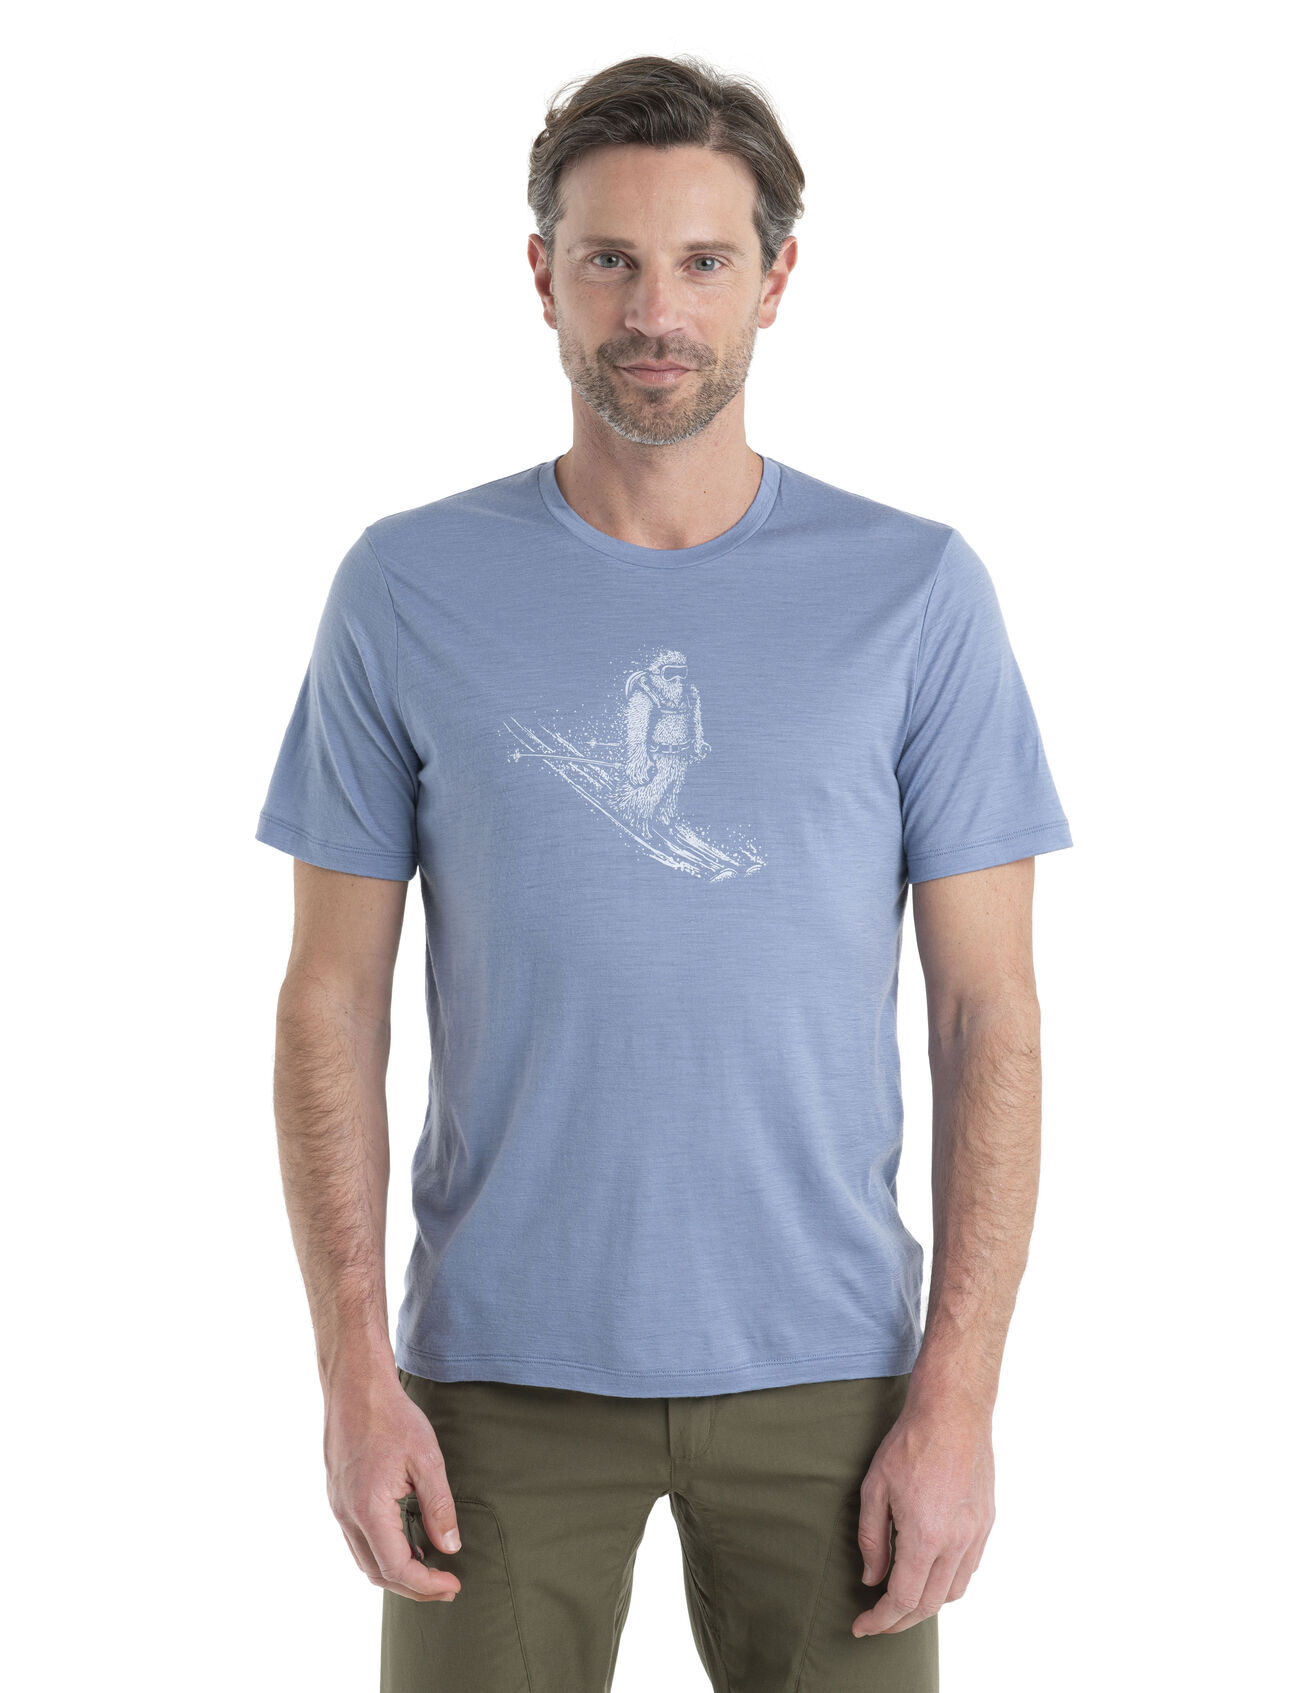 Mens Merino Tech Lite II Short Sleeve Tee Skiing Yeti Our versatile tech tee that provides comfort, breathability and natural odor-resistance for any adventure you can think of, the Tech Lite II Short Sleeve Tee Skiing Yeti features 100% merino for all-natural performance. The original artwork by Damon Watters features a fun illustration of the ultimate mountain dweller enjoying some turns.